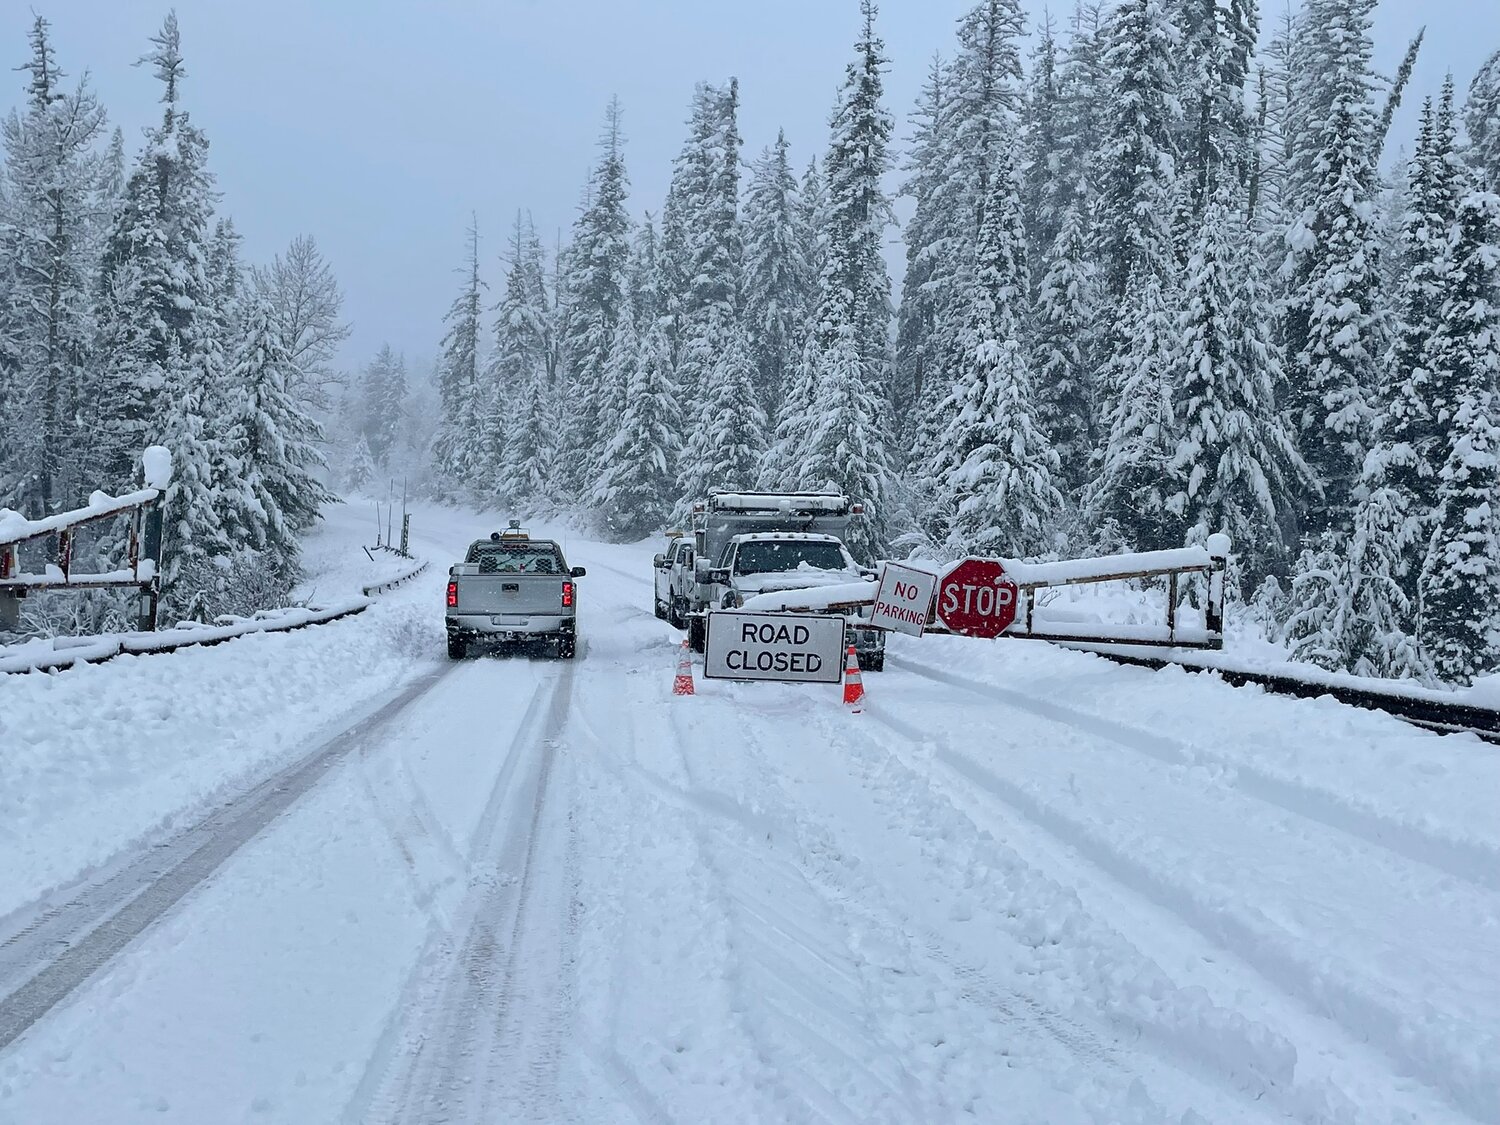 WSDOT crews closing North Cascades Highway during a temporary closure on November 10. The highway will be shut down on November 30 between milepost 134 at Ross Dam Trailhead to milepost 171 at Silver Star.